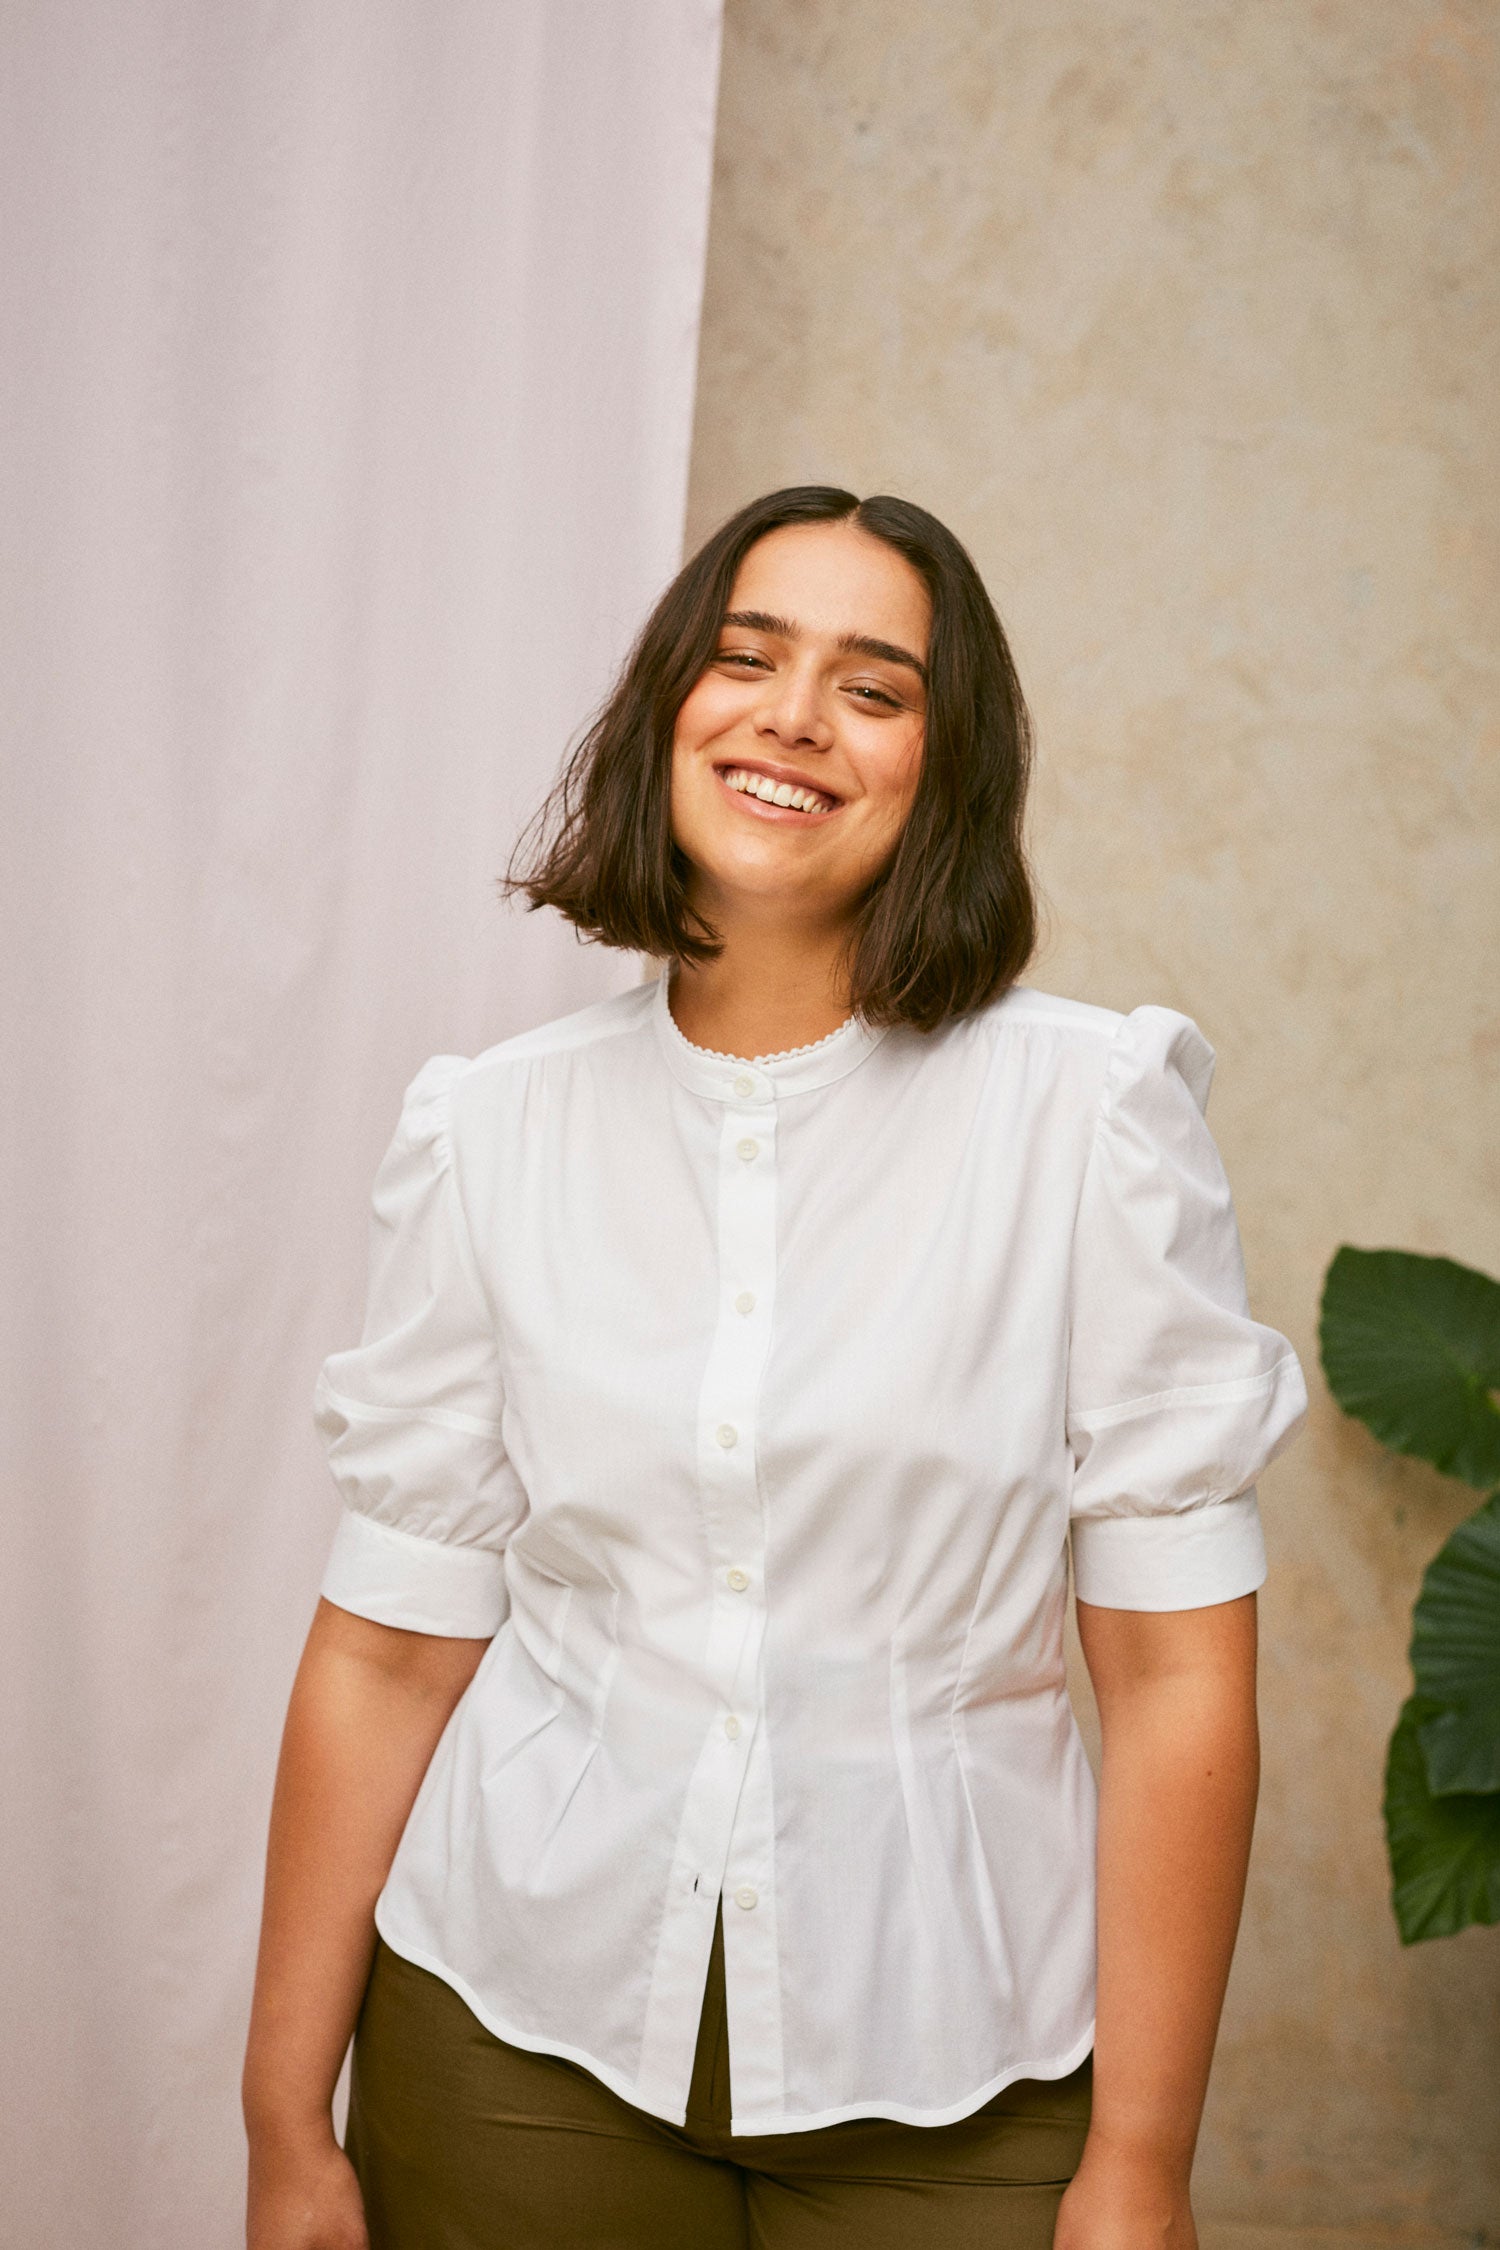 Model stands smiling, wearing Saywood's Joni puff sleeve blouse in white with scalloped hem, worn with khaki Amelia wide leg trousers. A plant and drop of pink fabric can be seen in the background.